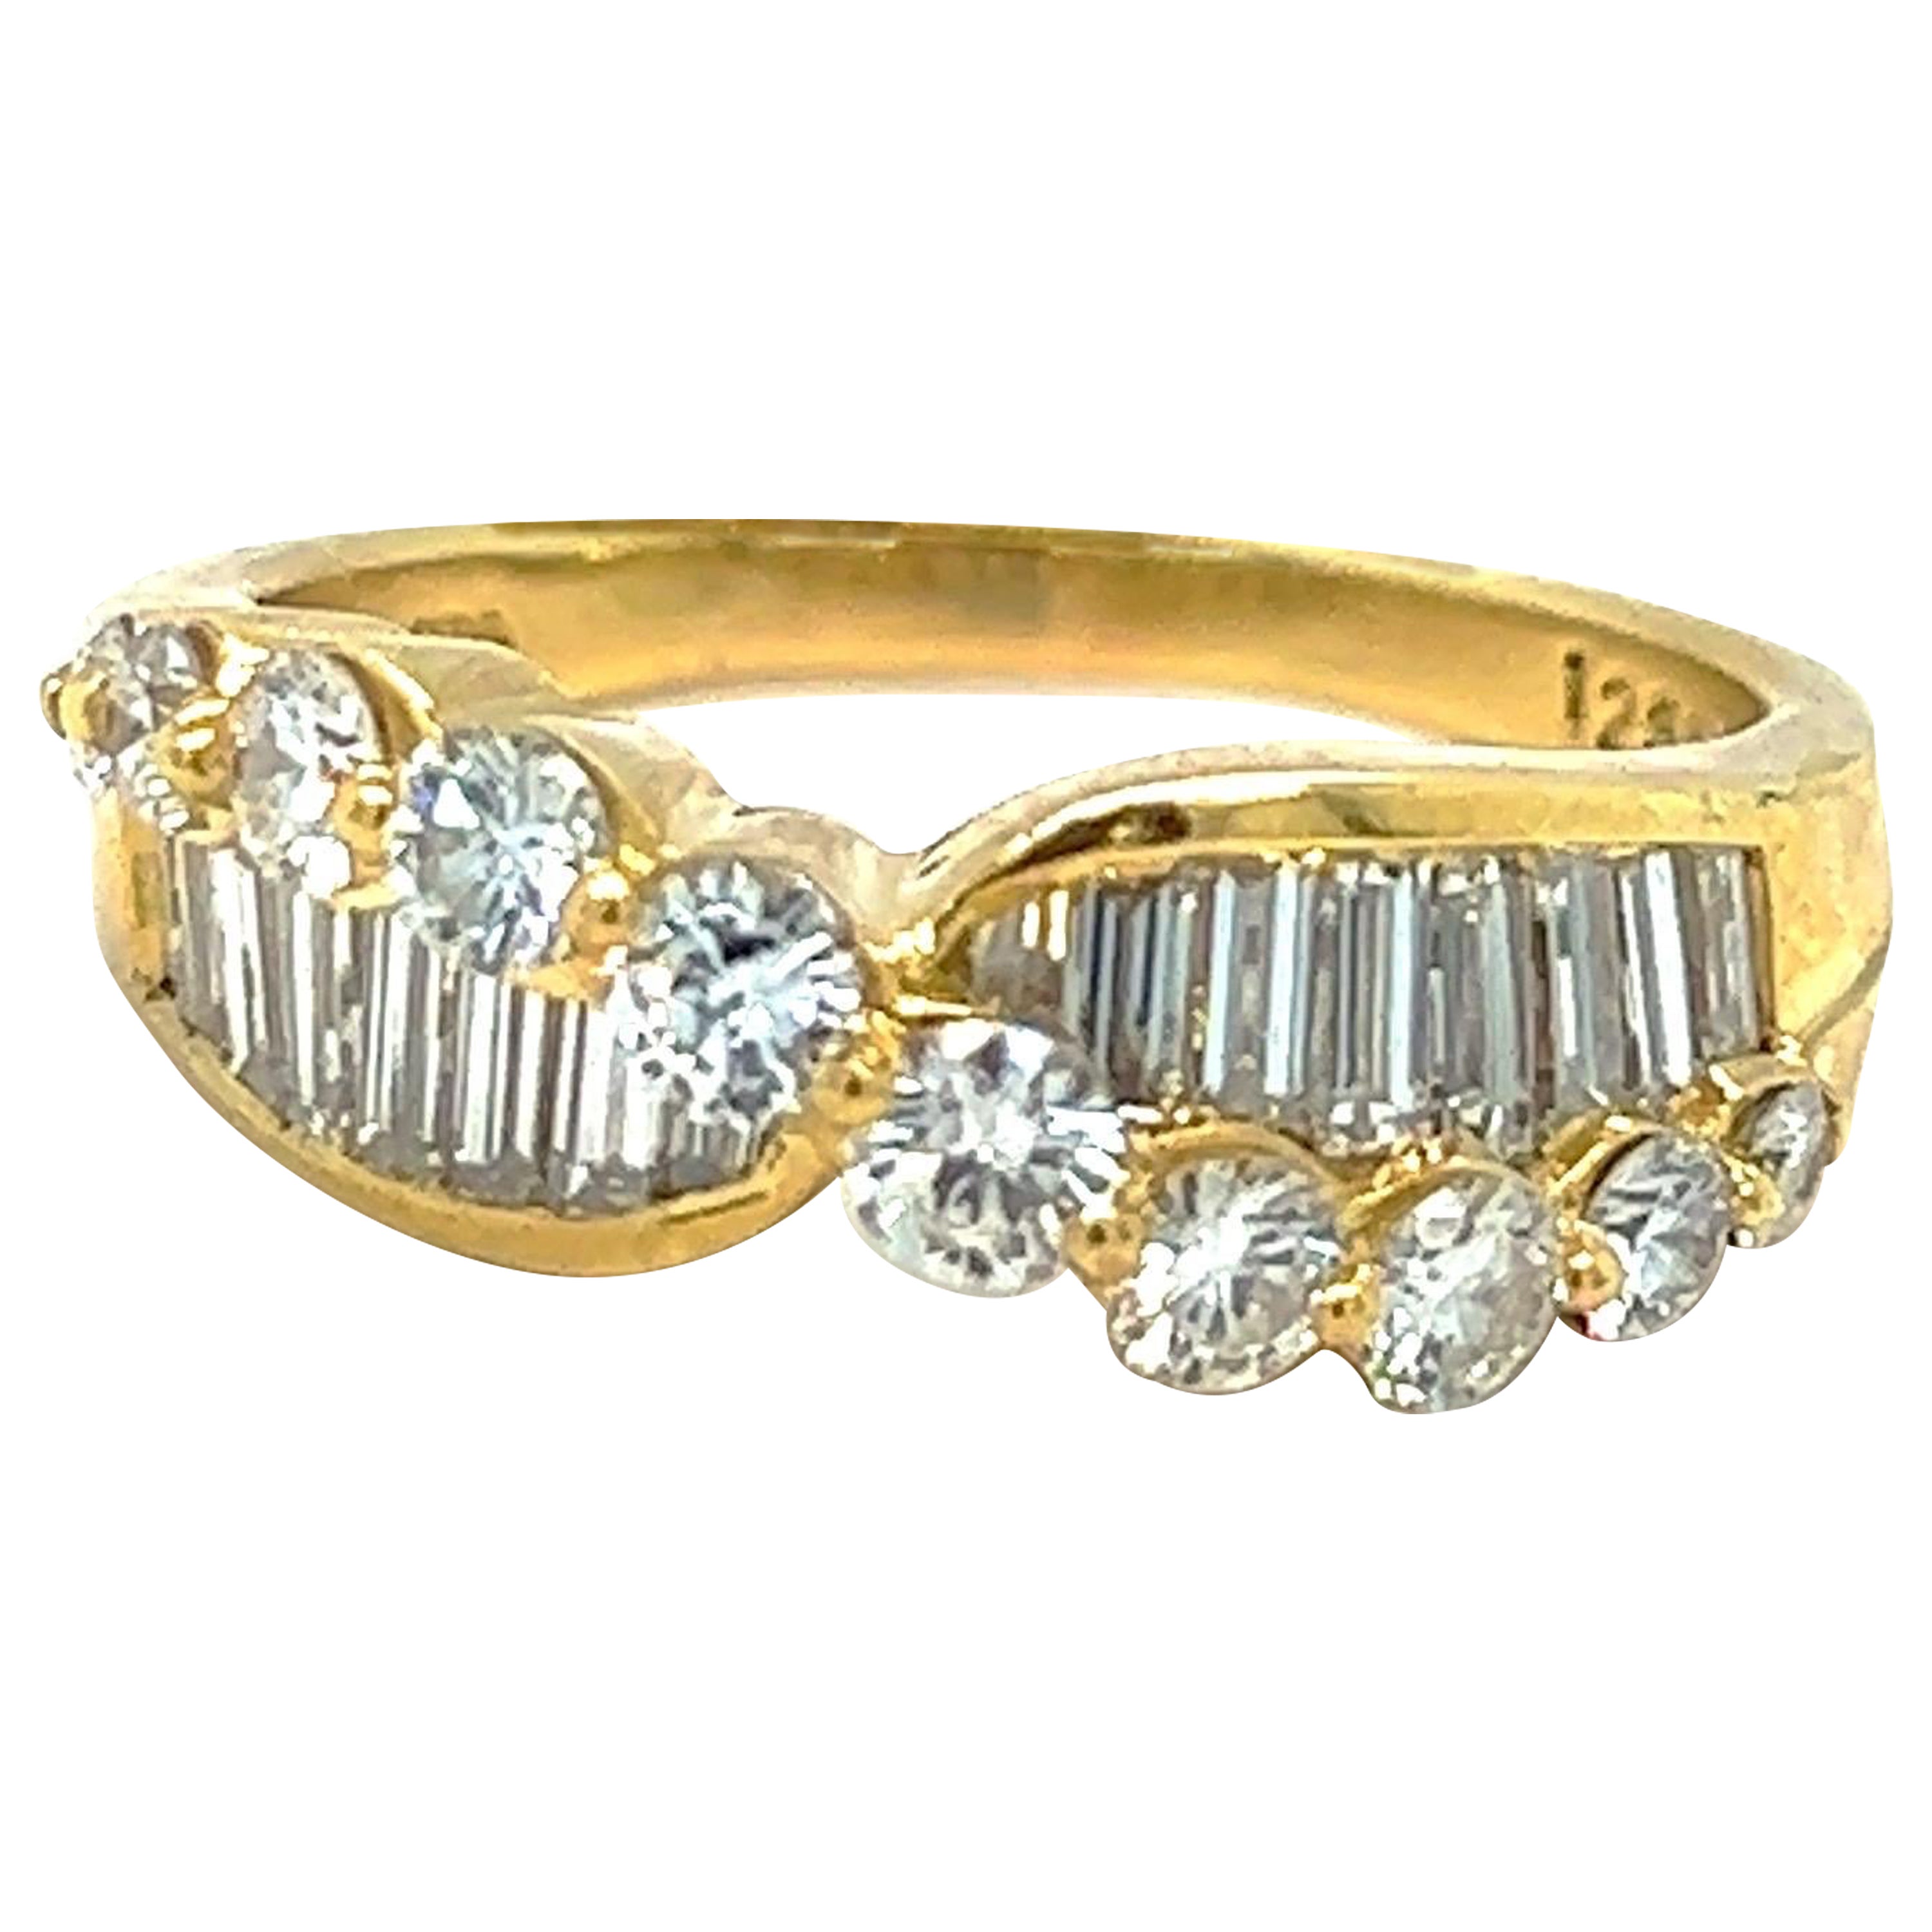 Nova 18KT Yellow Gold 1.93 Cts. Round and Baguette Diamond Ring